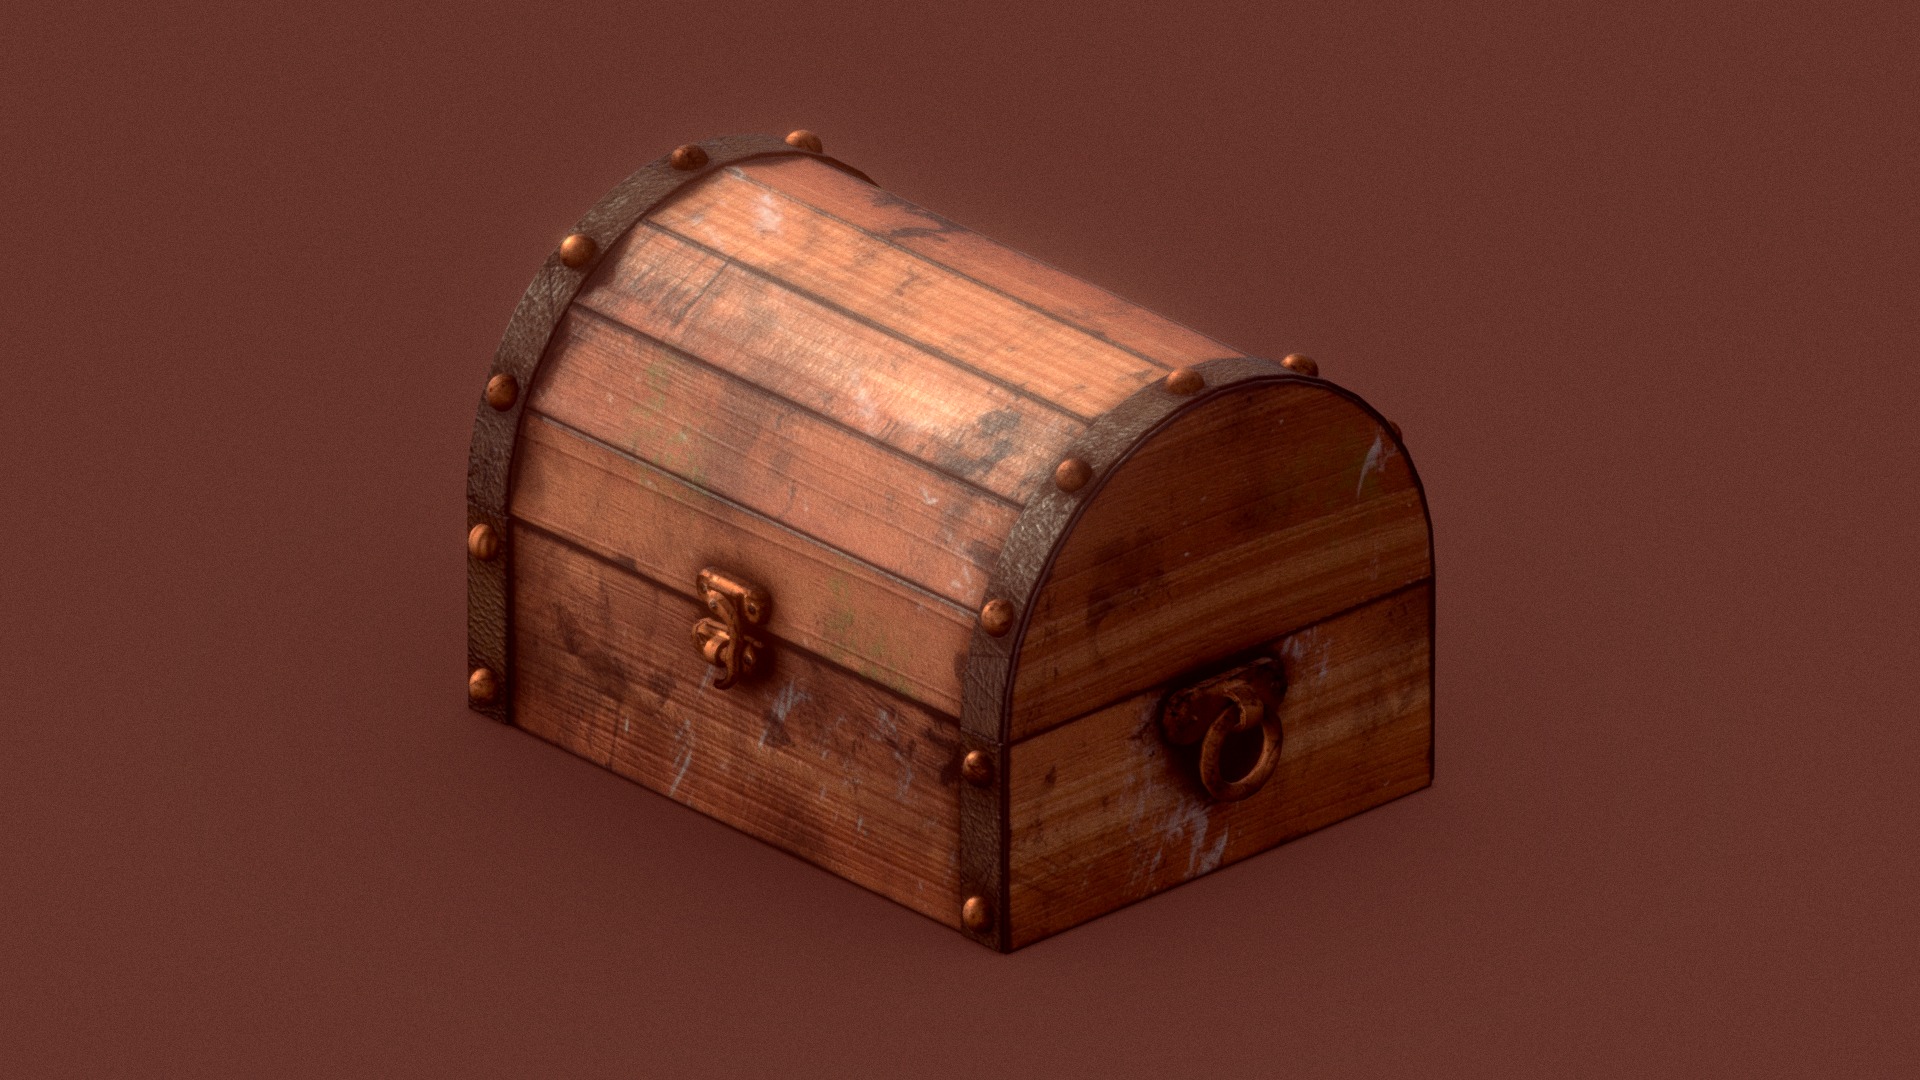 3D model CHEST V1 - This is a 3D model of the CHEST V1. The 3D model is about a wooden chest with a metal handle.